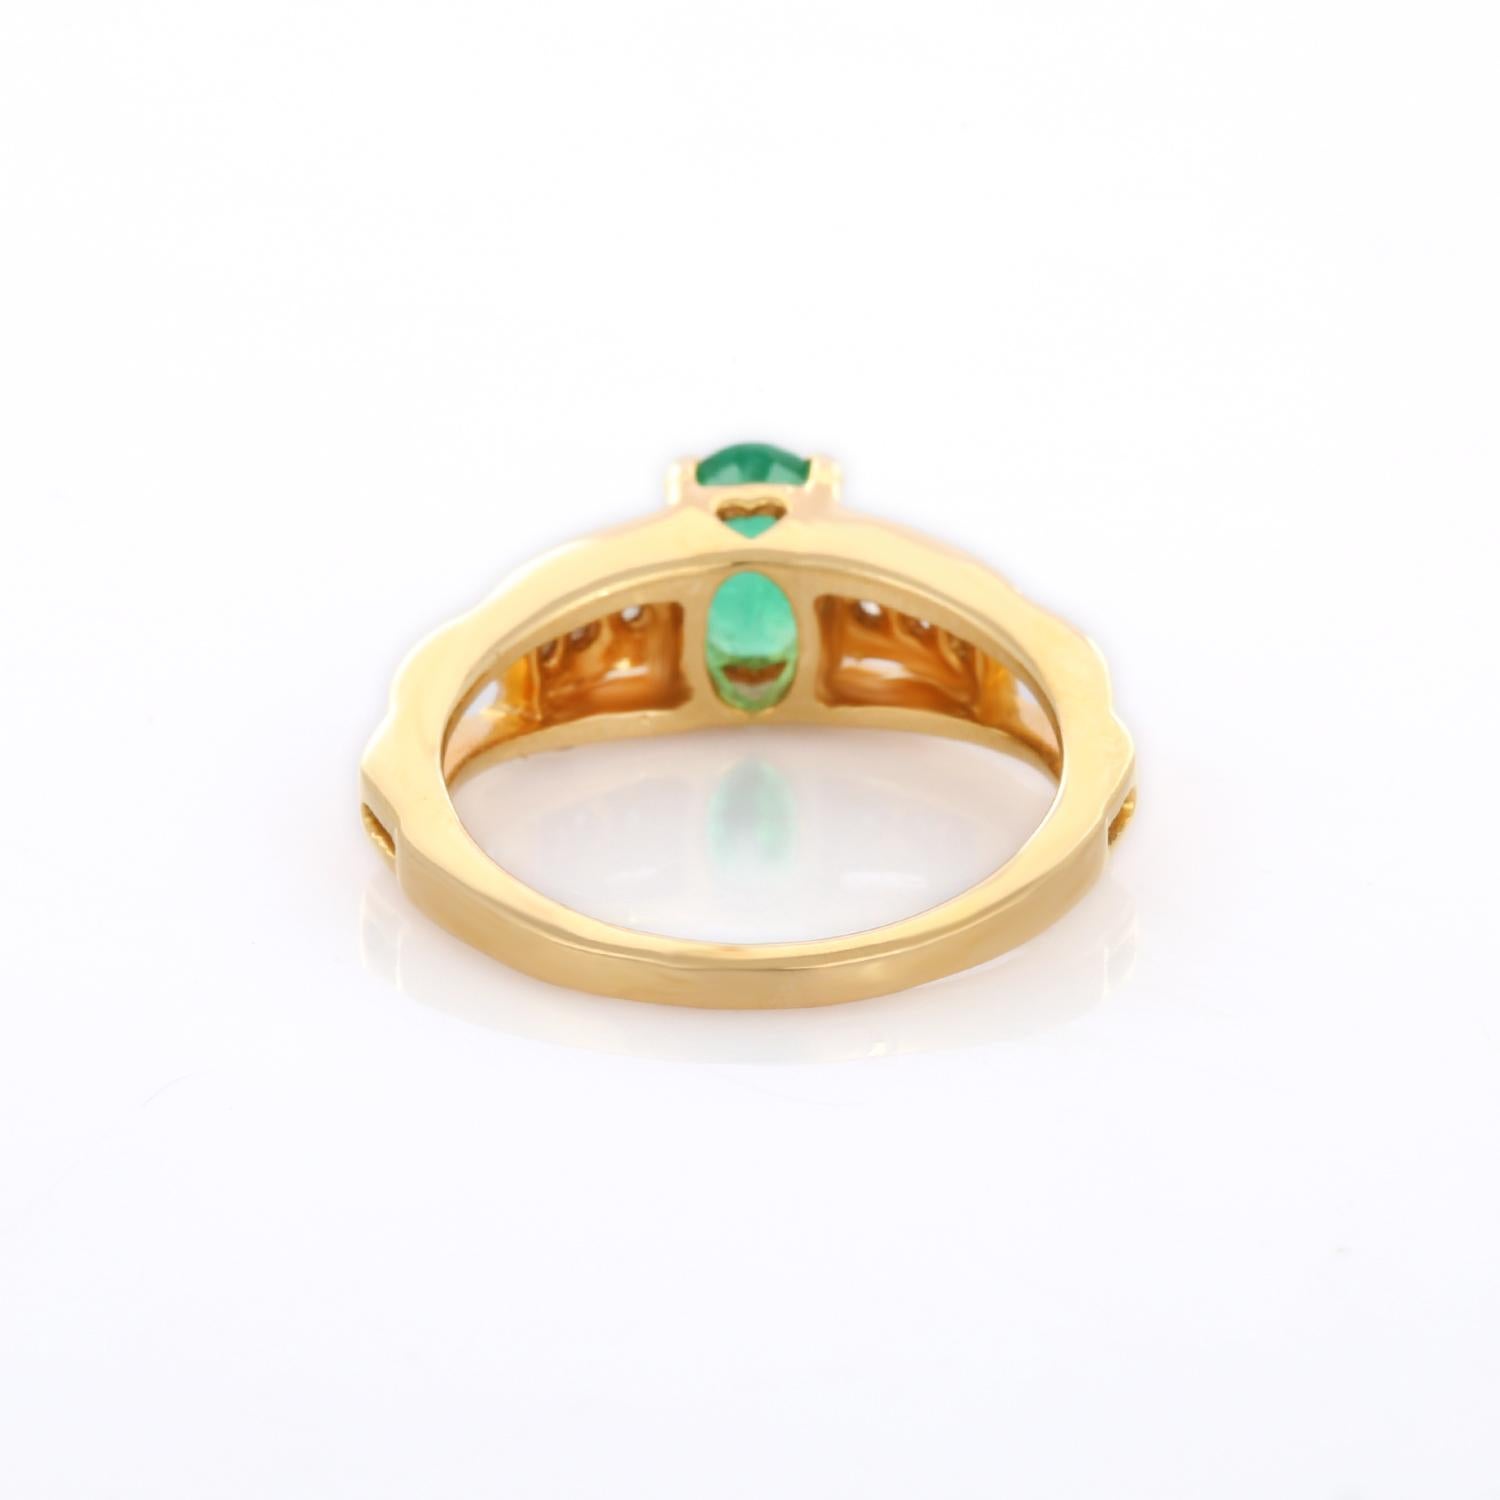 For Sale:  18K Yellow Gold Oval Shaped Emerald Ring with Diamonds 7